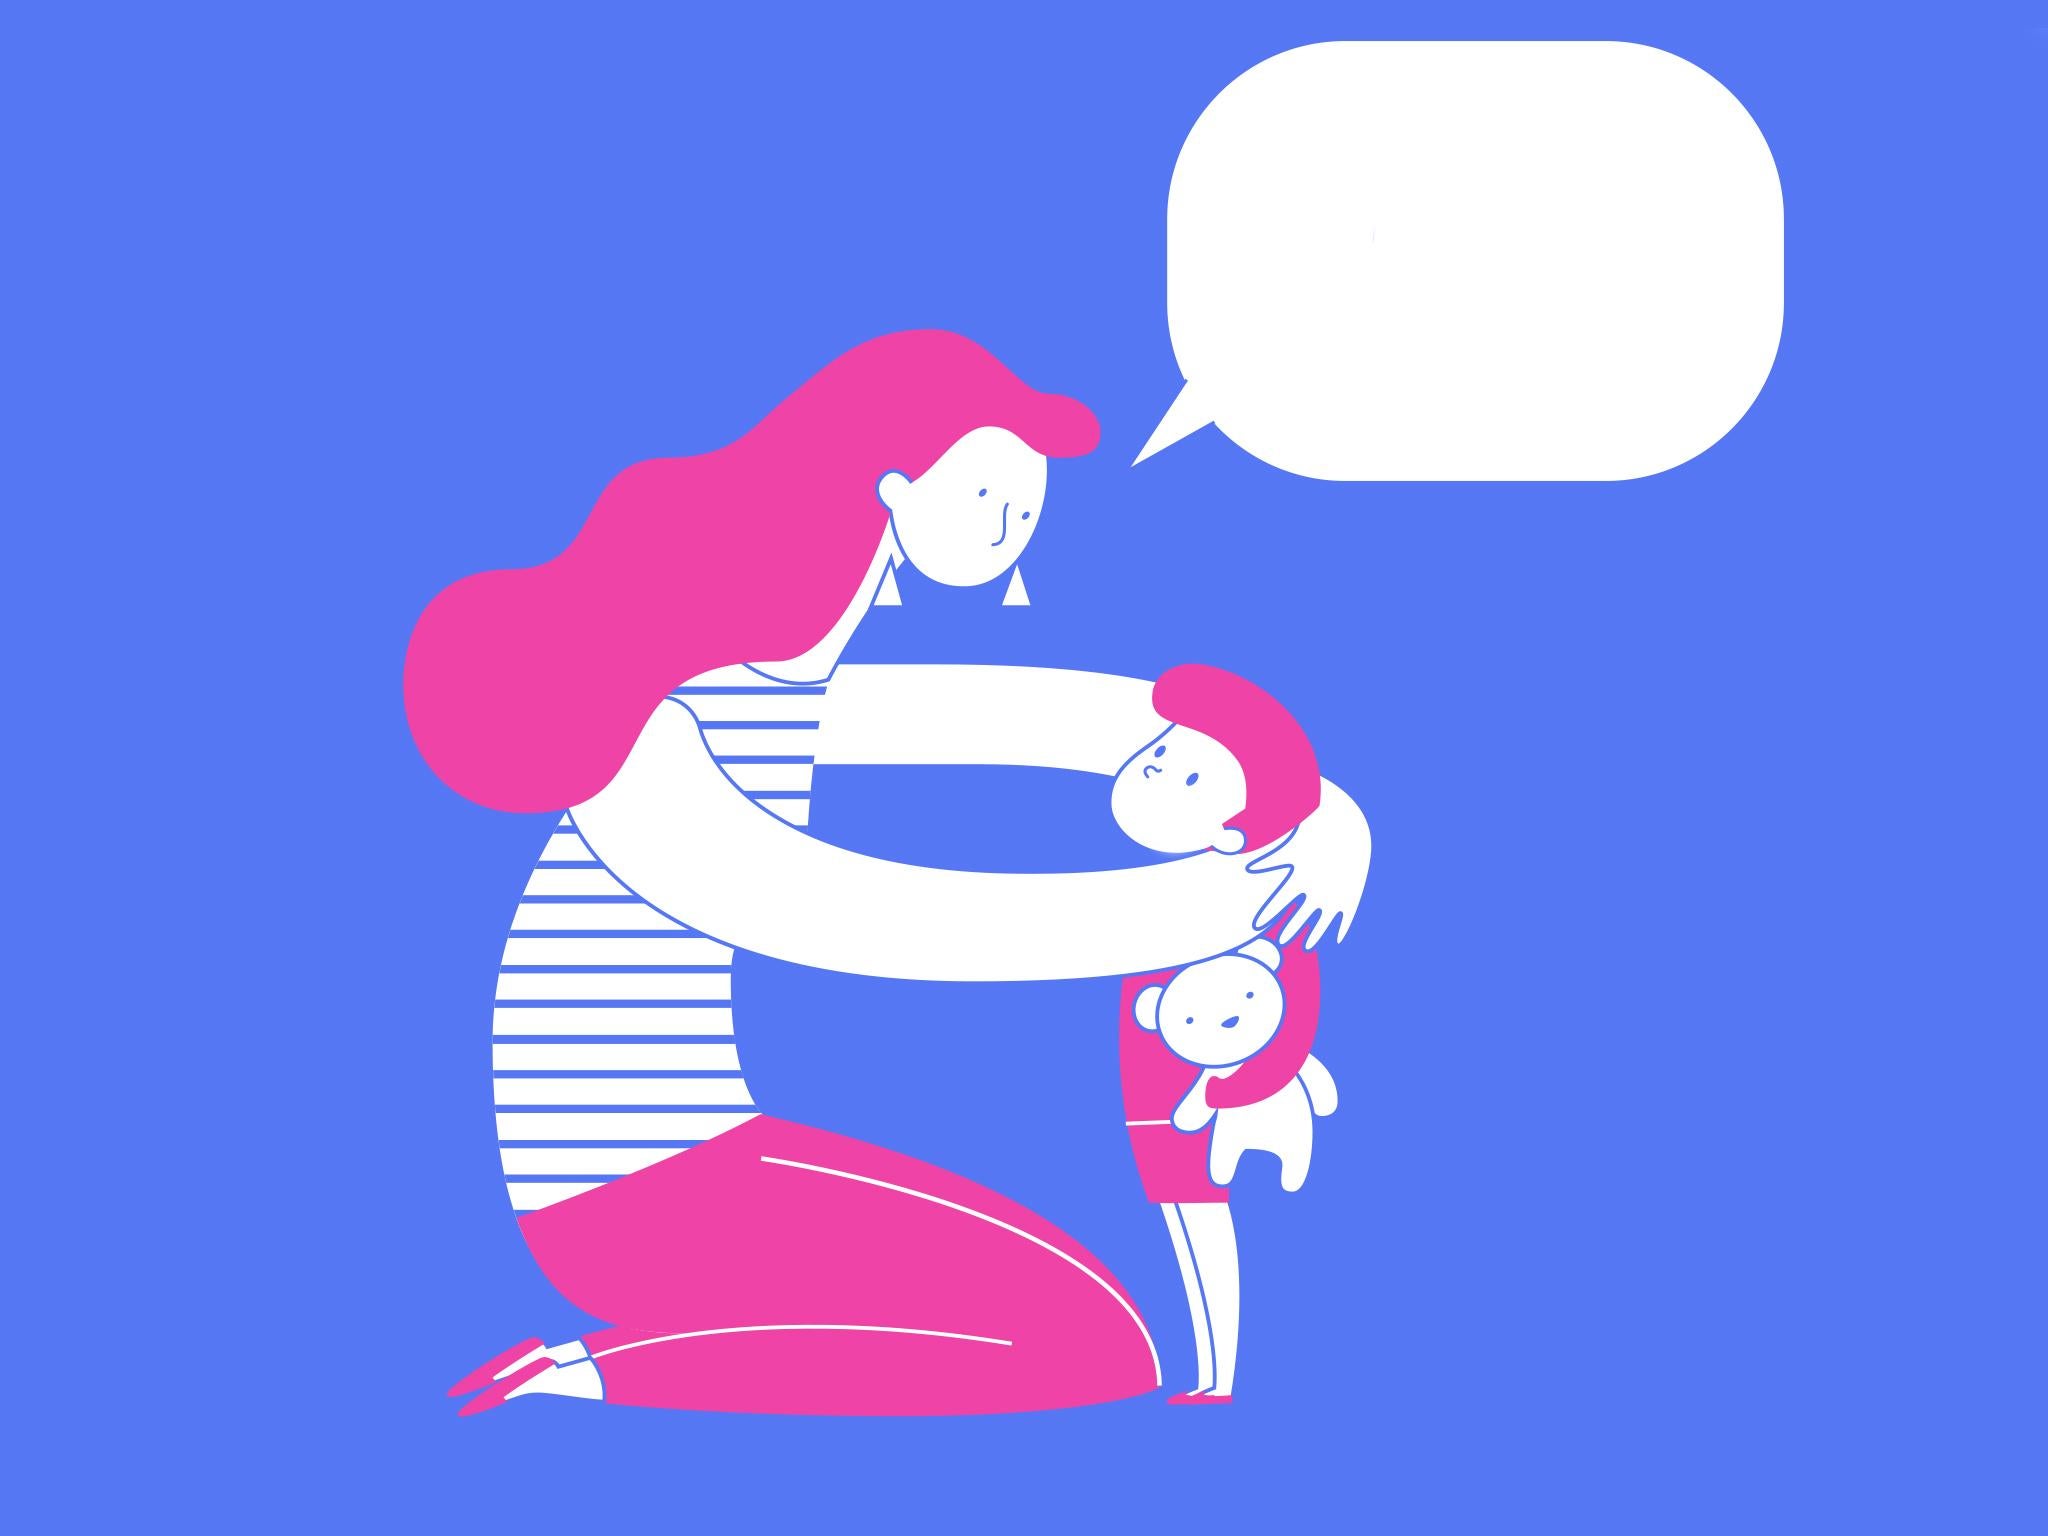 Be an ‘askable’ parent: calm and curious about your child’s questions